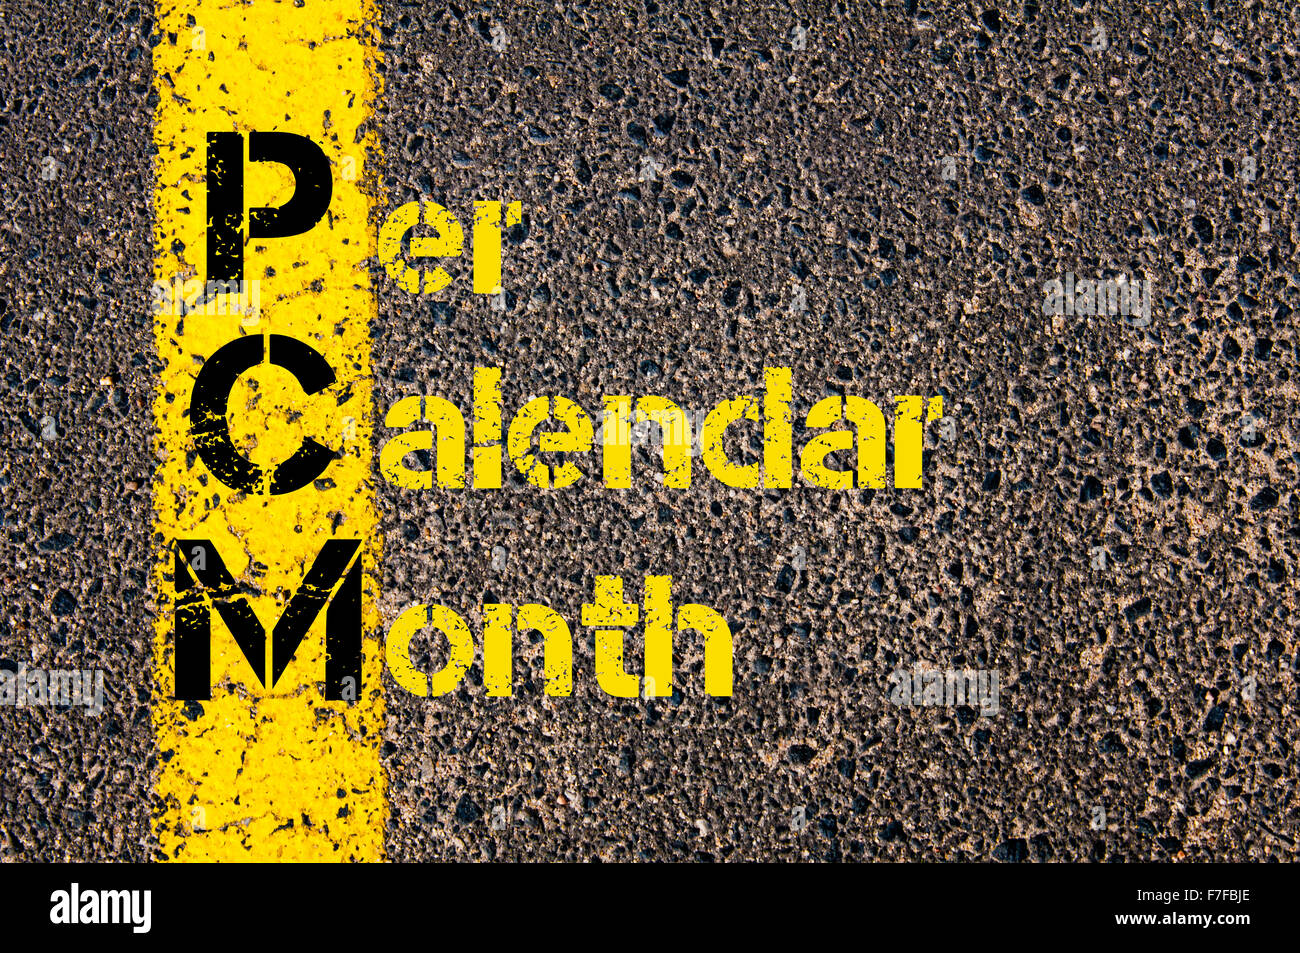 Concept image of Accounting Business Acronym PCM Per Calendar Month